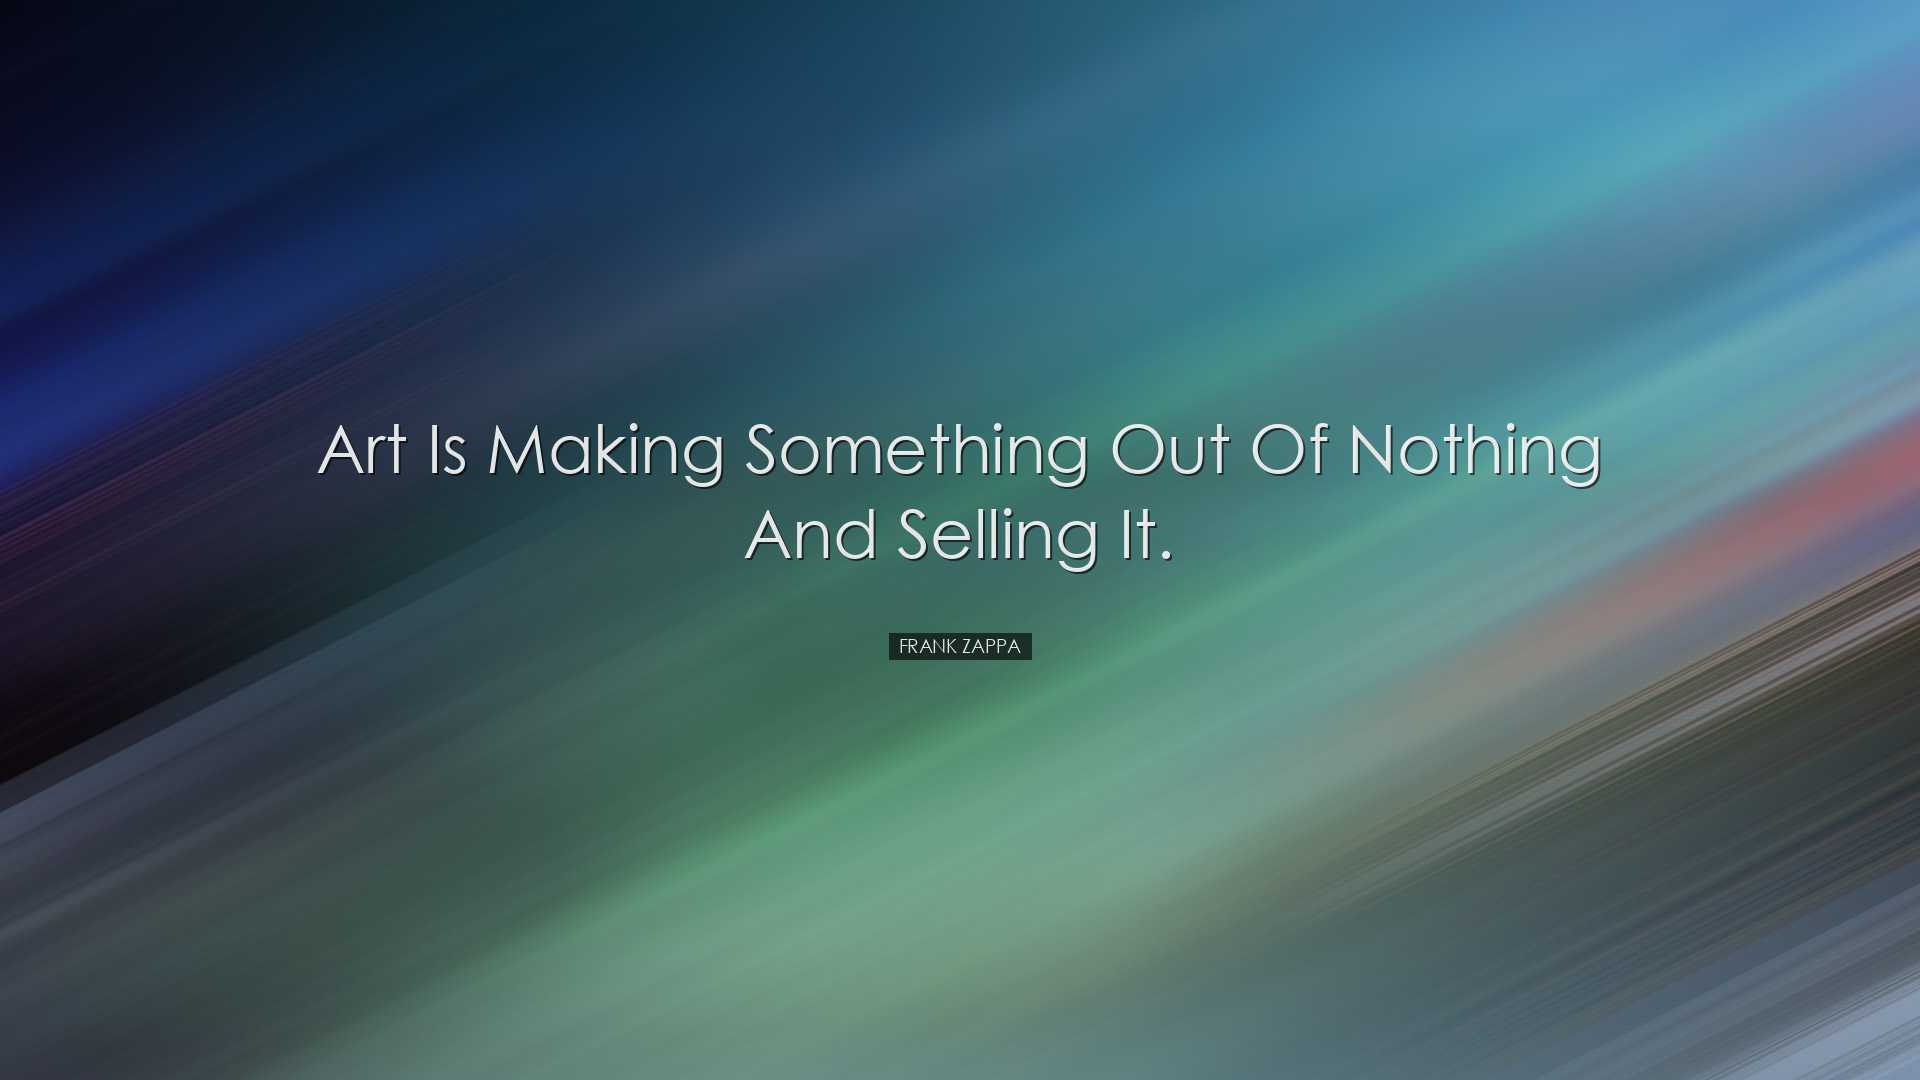 Art is making something out of nothing and selling it. - Frank Zap